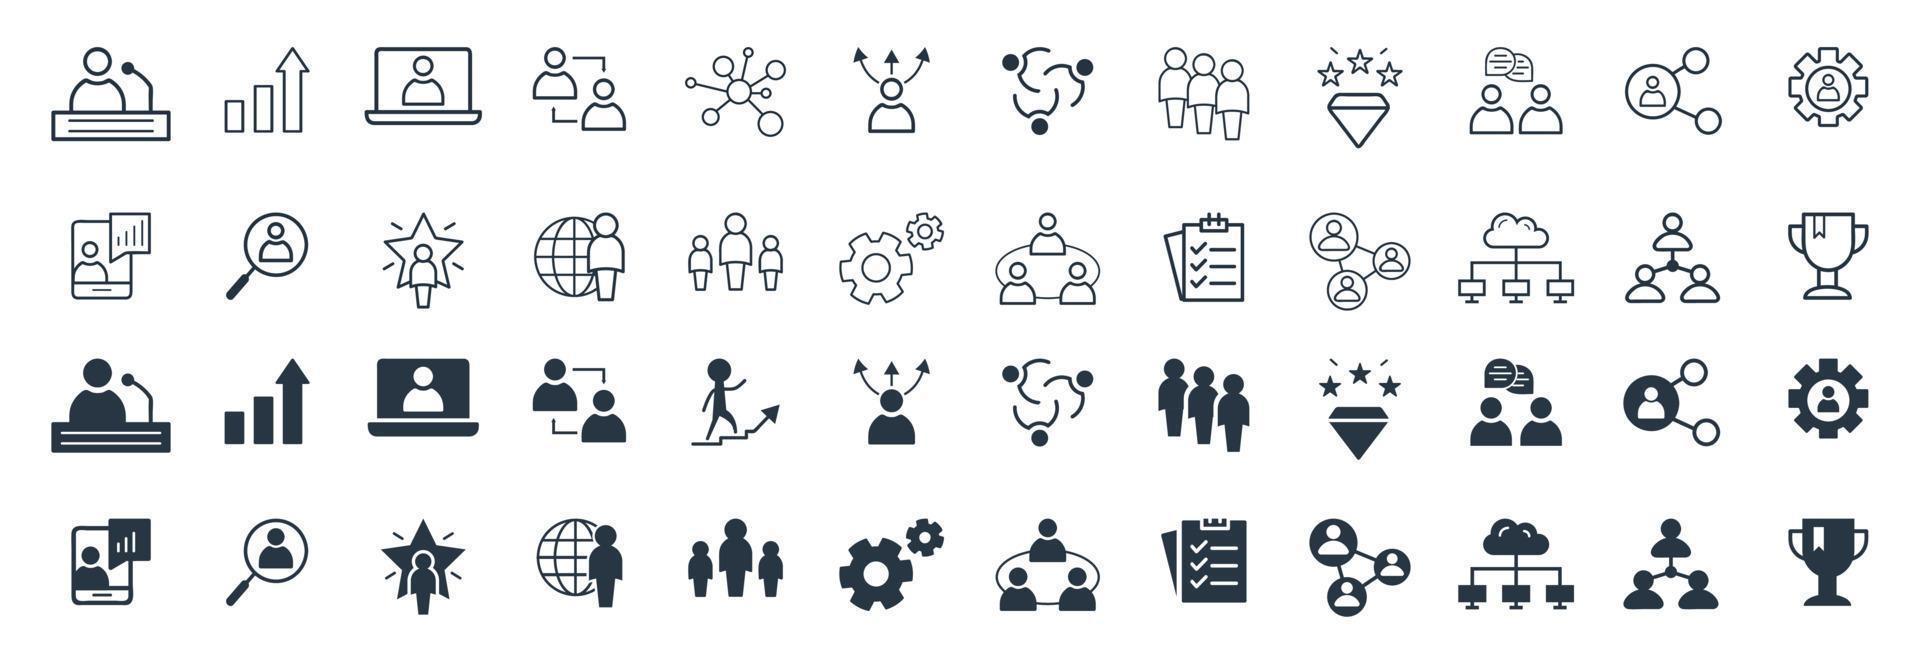 Teamwork of Business people and human resources vector icon set